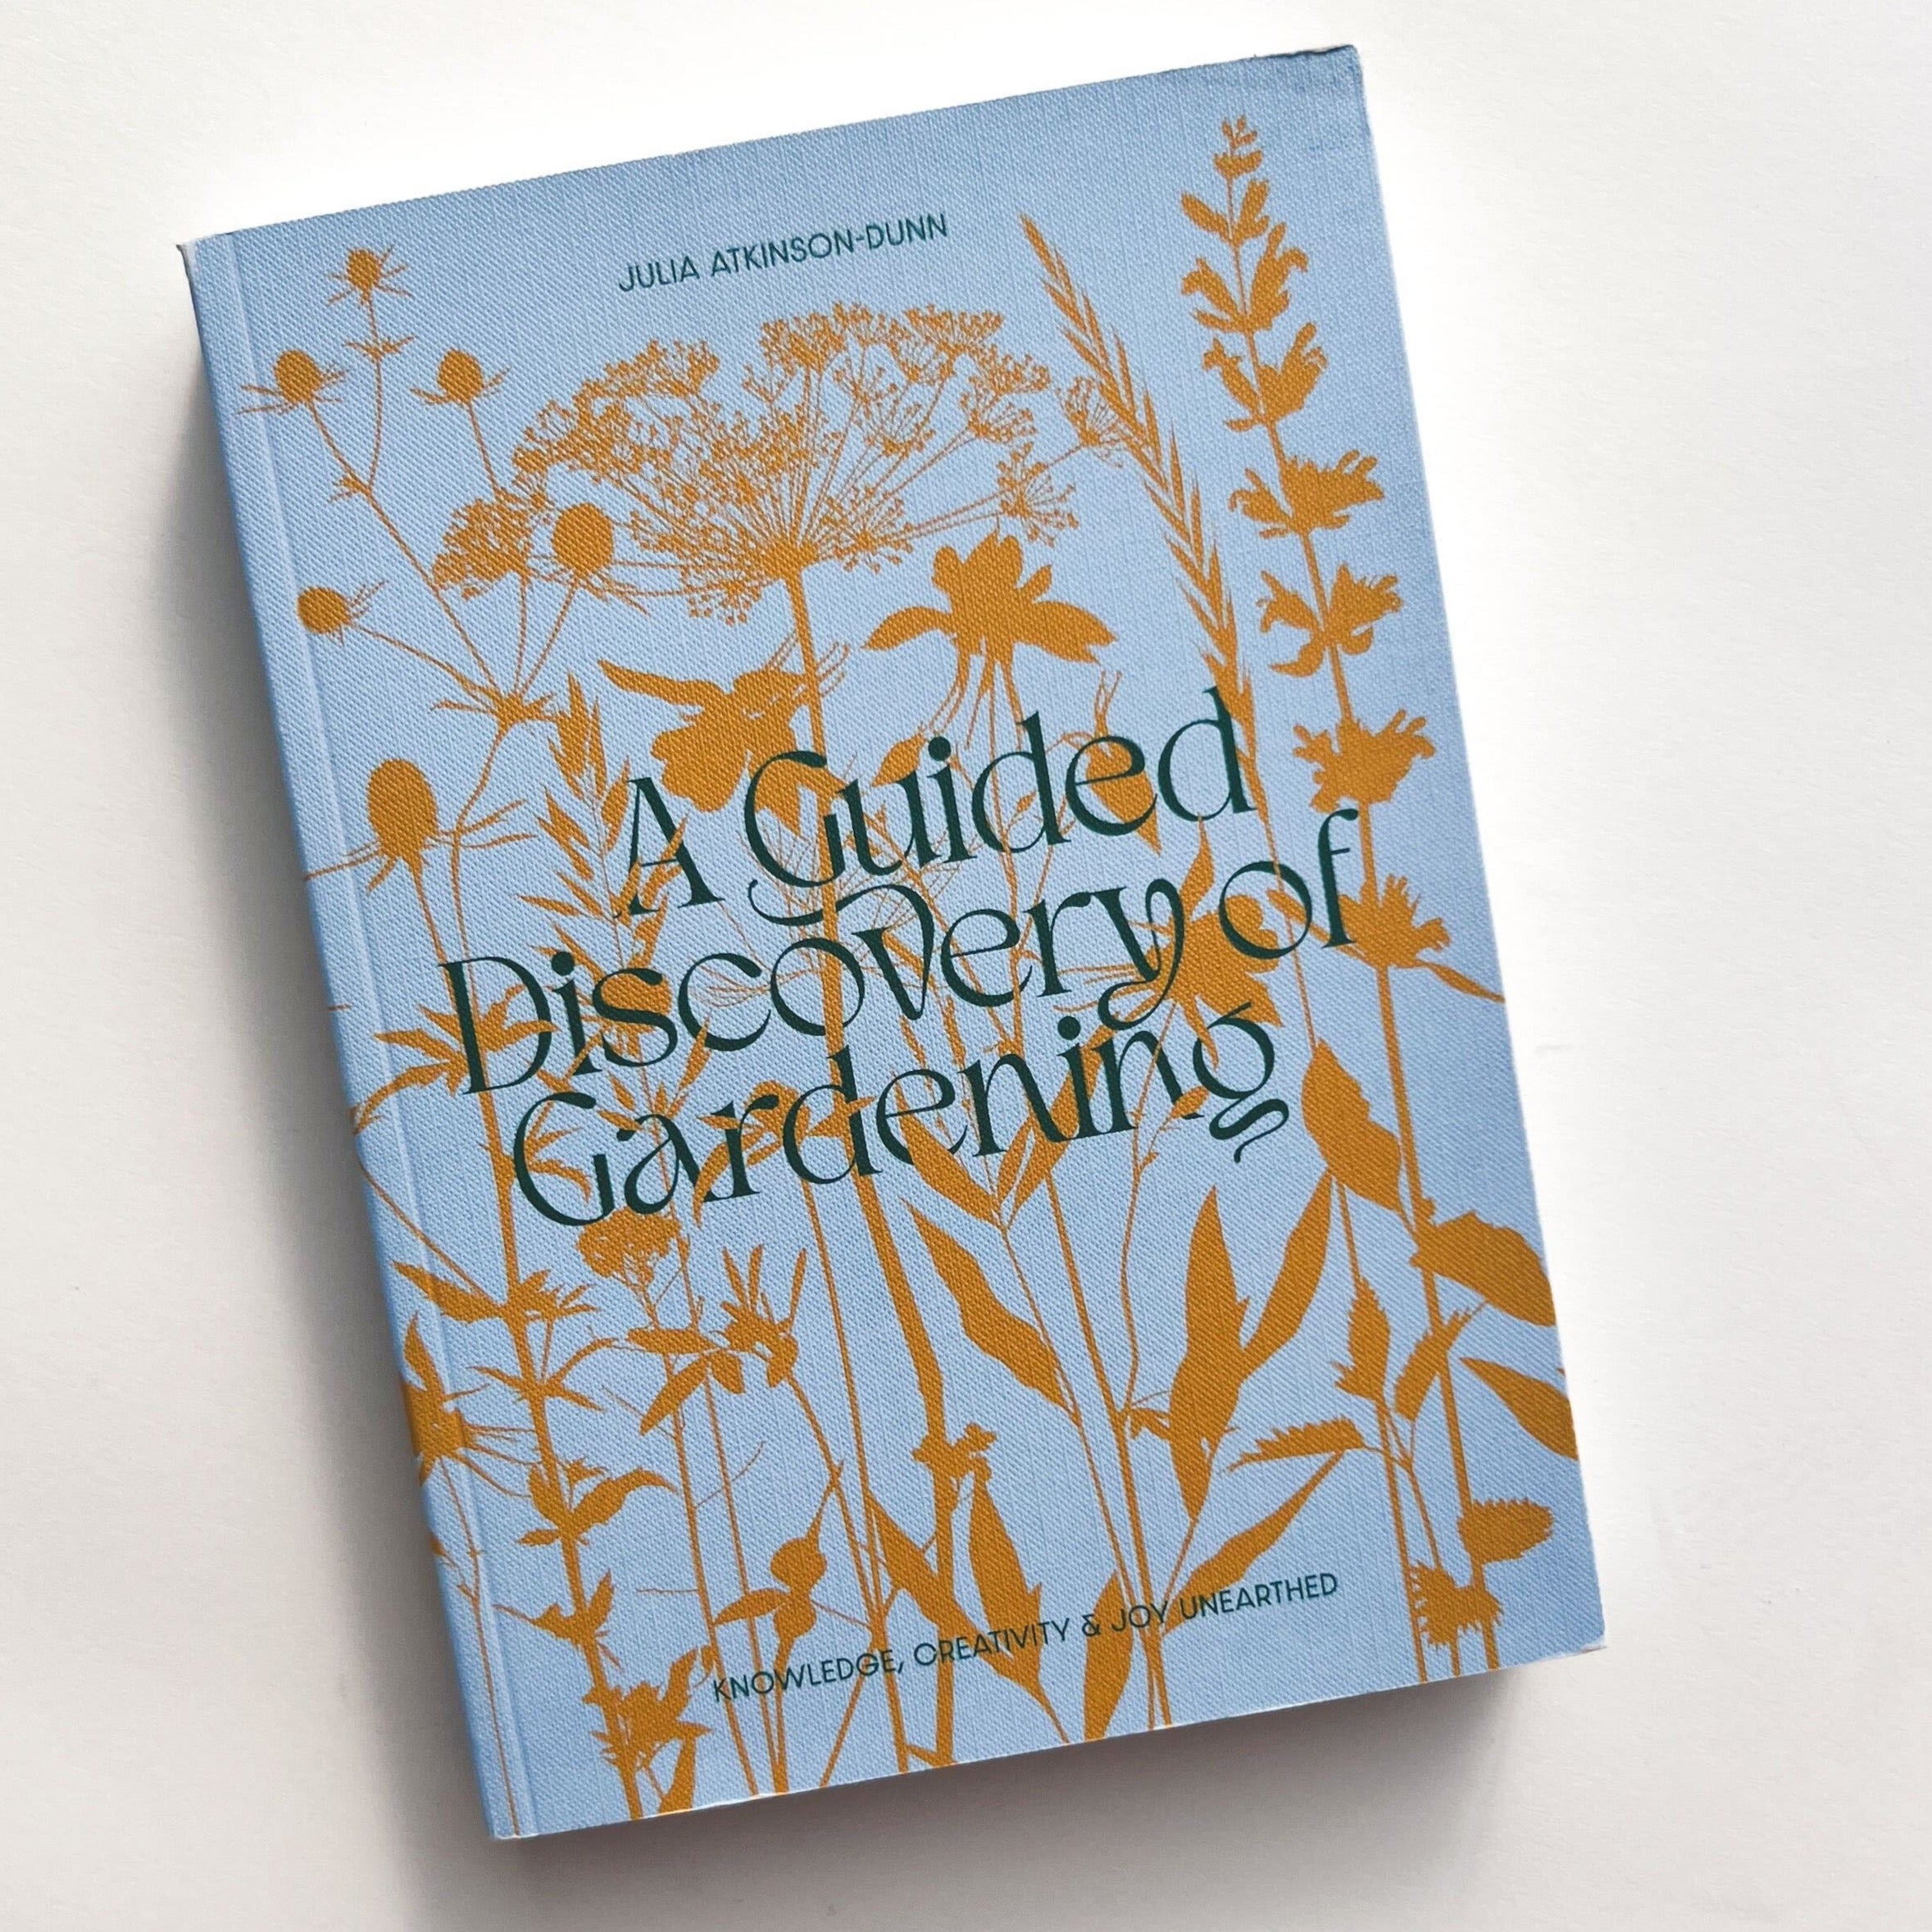 Blue book cover for A Guided Discovery of Gardening